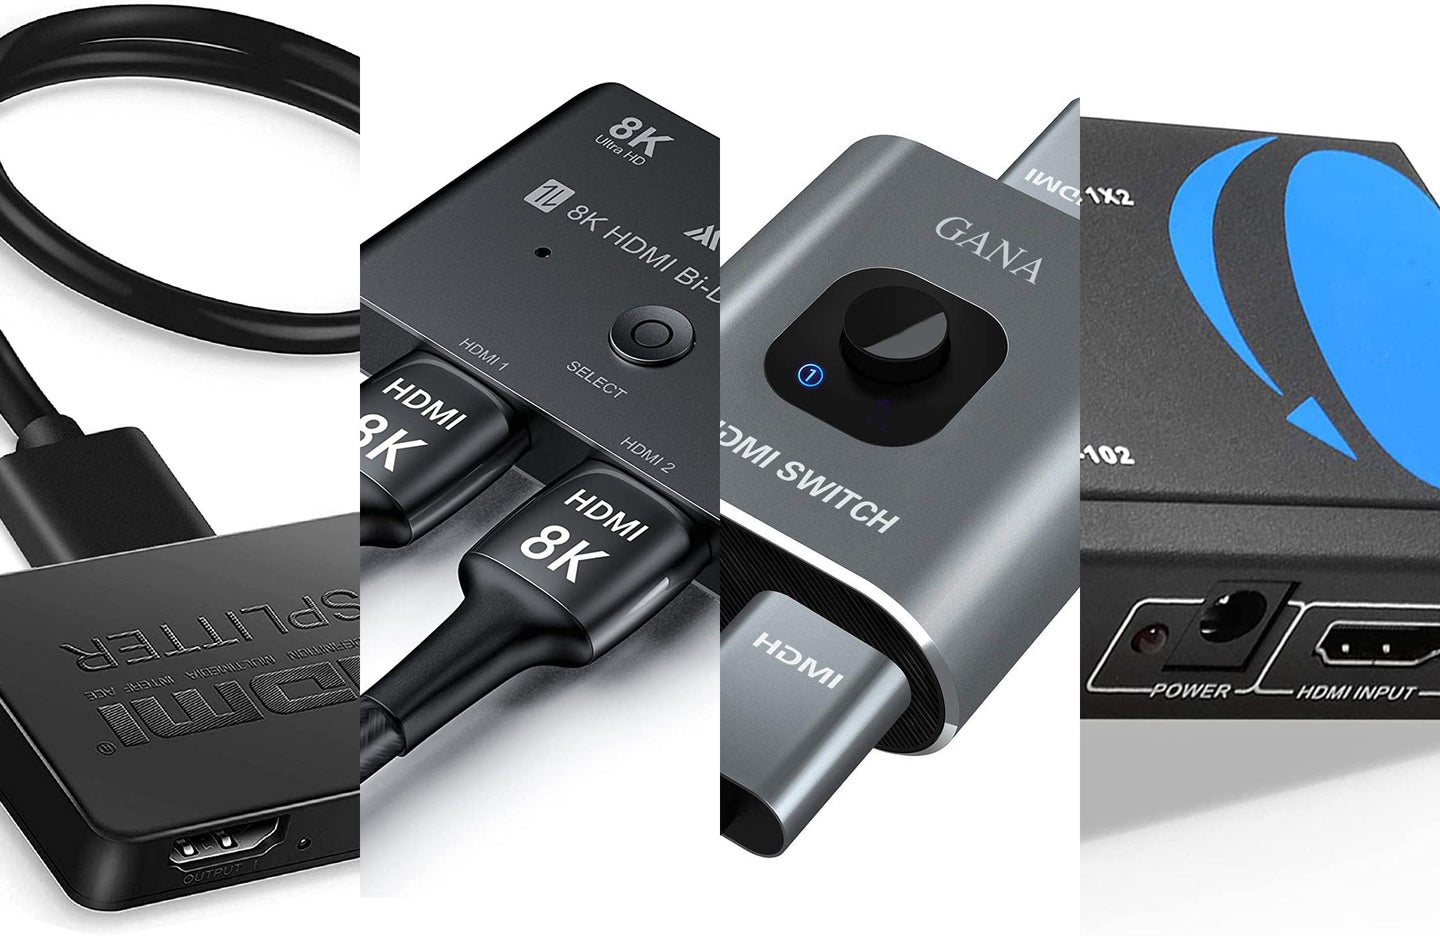 The best HDMI switches in 2022